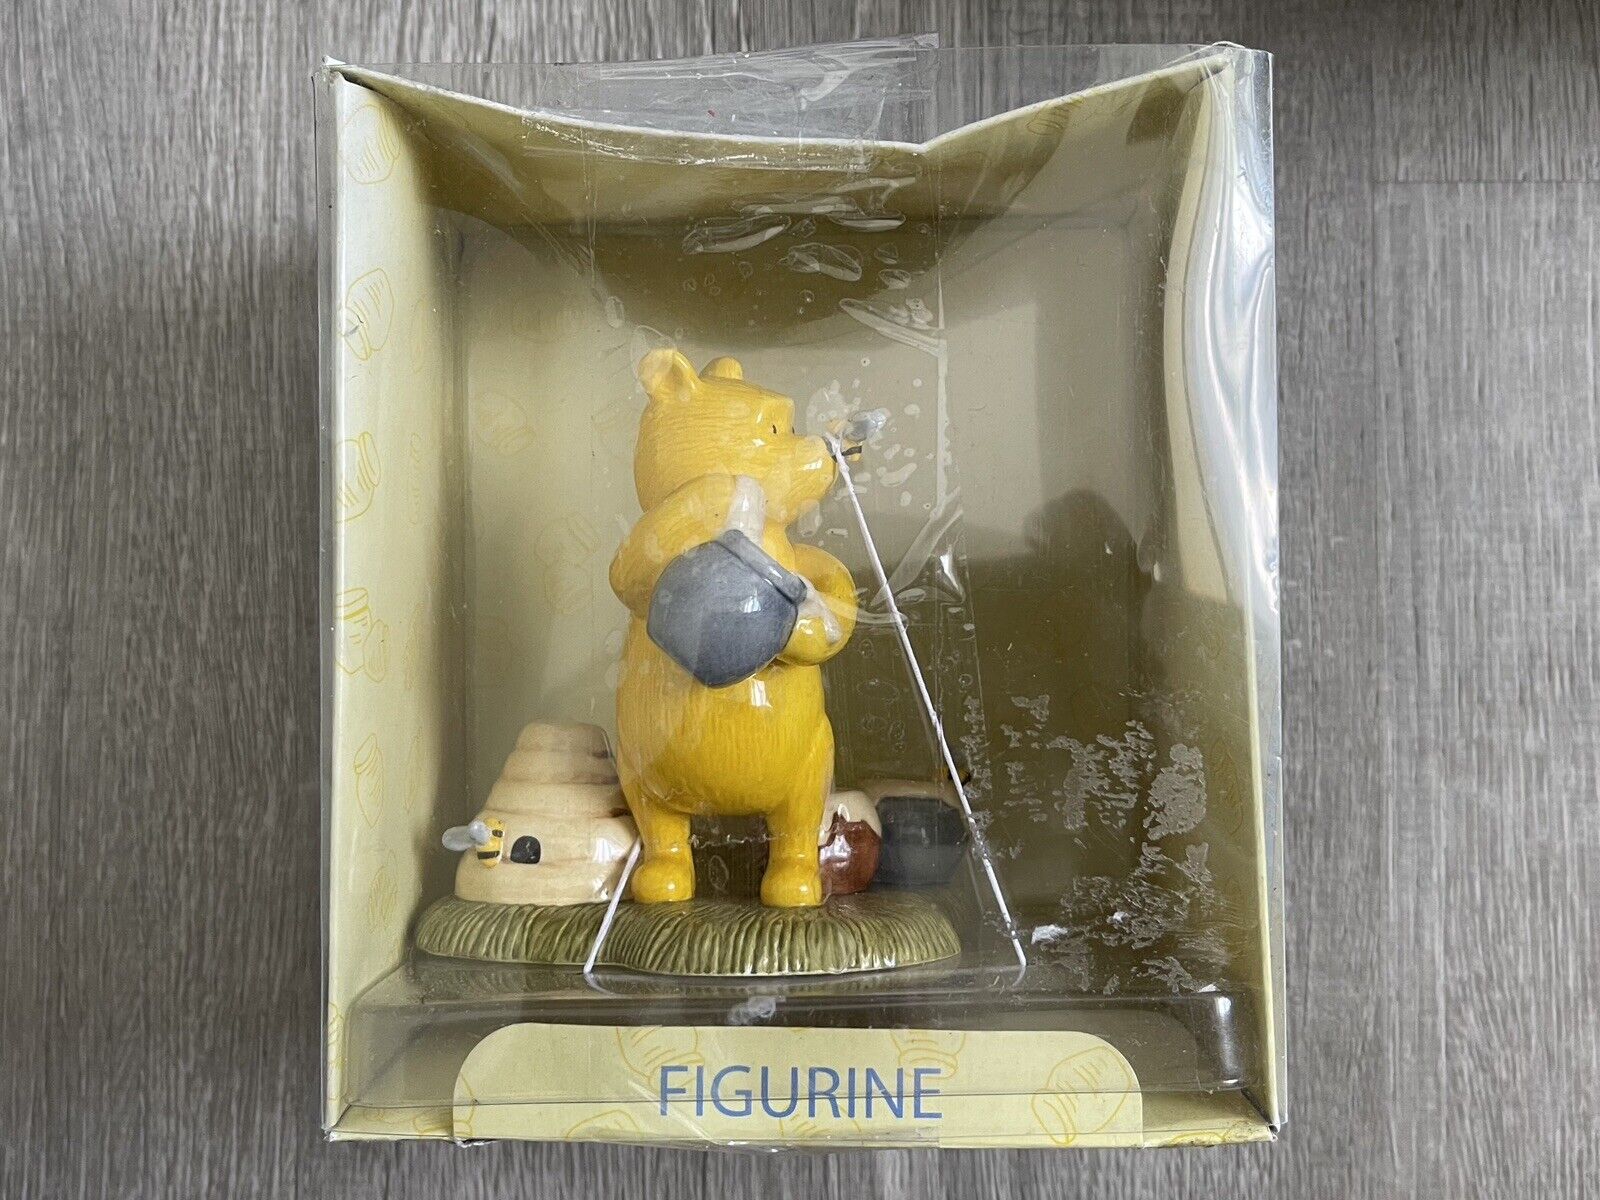 Royal Doulton Winnie The Pooh Figurine - “Any Hunny Left For Me” WP48 (2003-04)